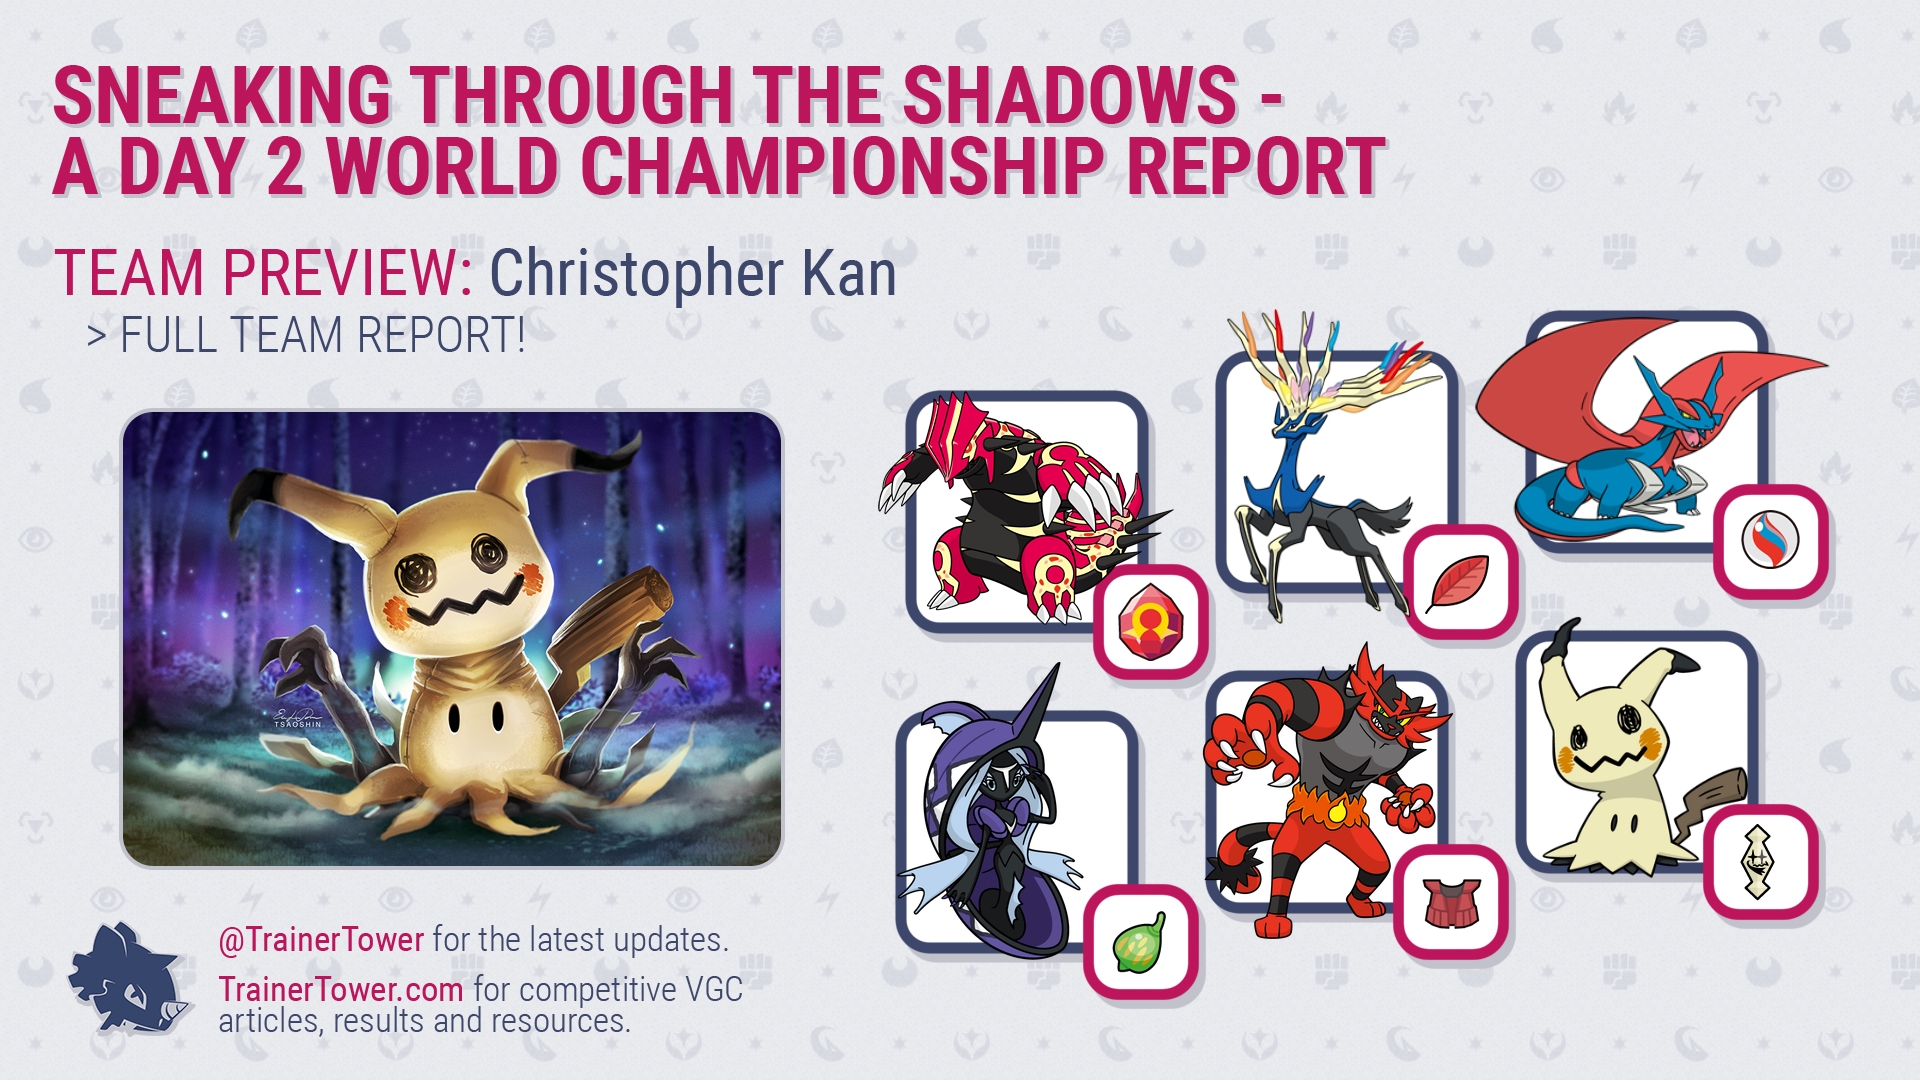 The reports are in—a surge of Ultra Beasts is approaching! – Pokémon GO